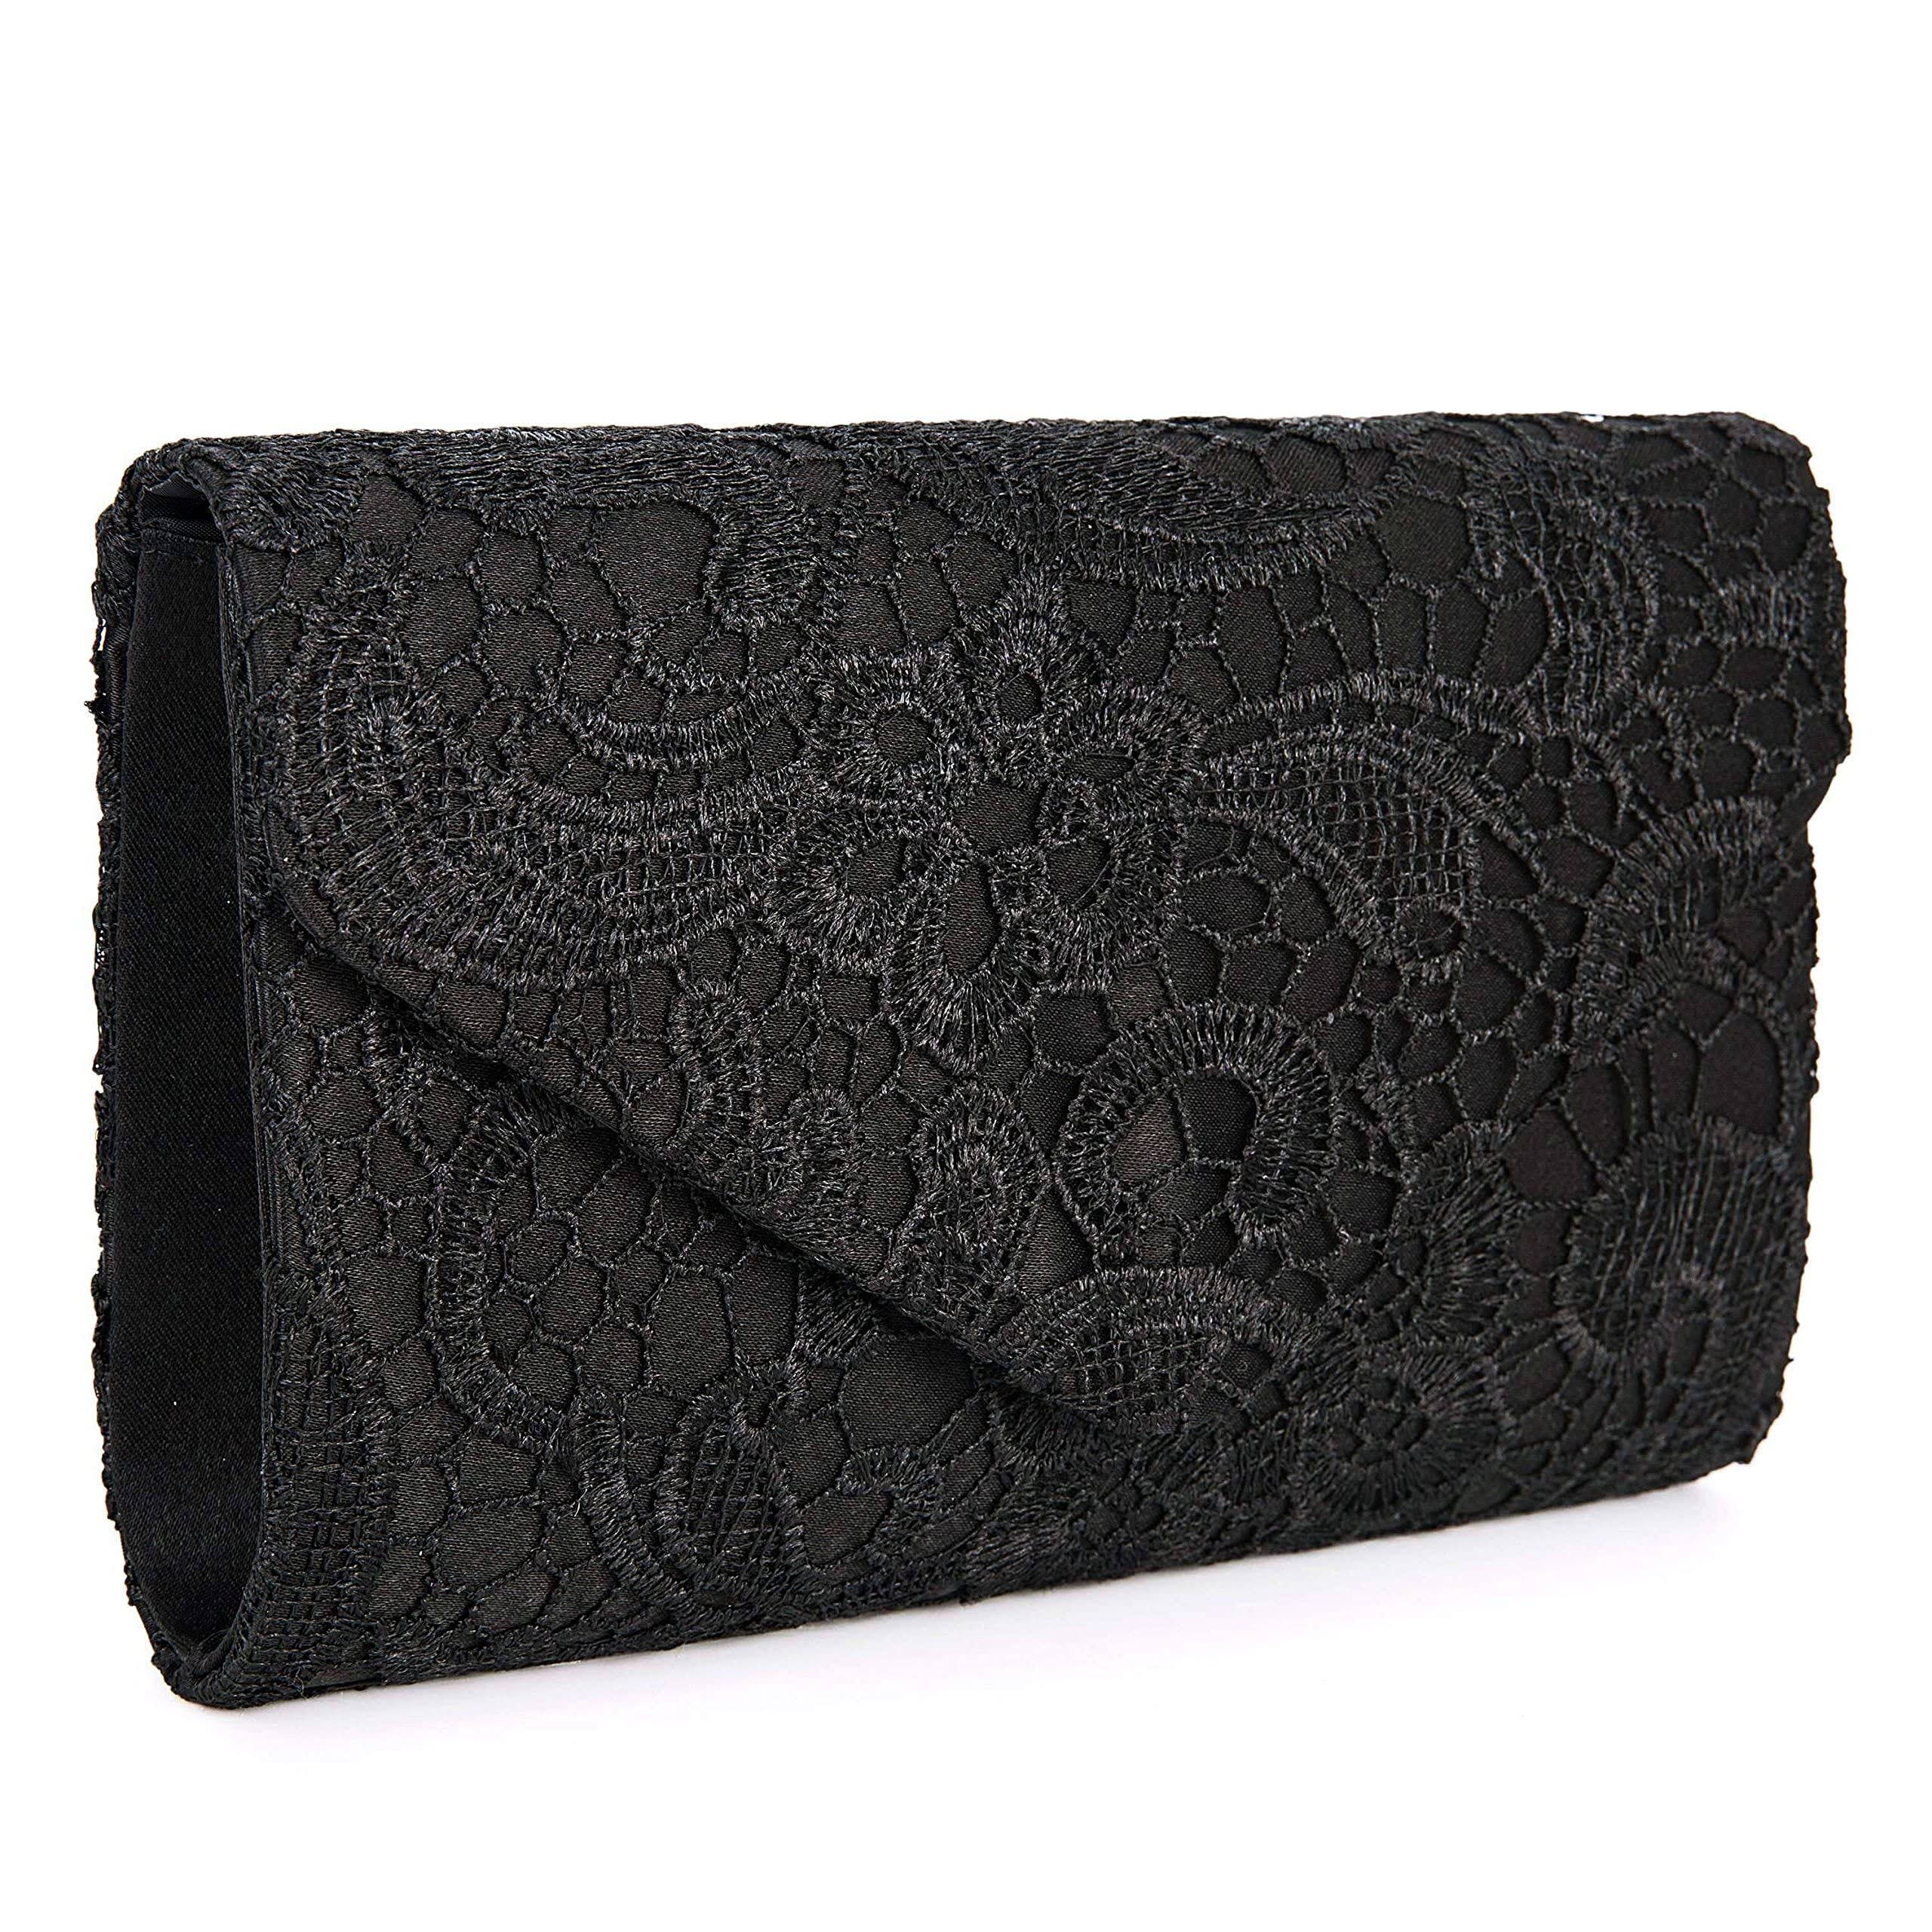 Chic Floral Lace Envelope Clutch for Night Outs and Special Occasions | Image